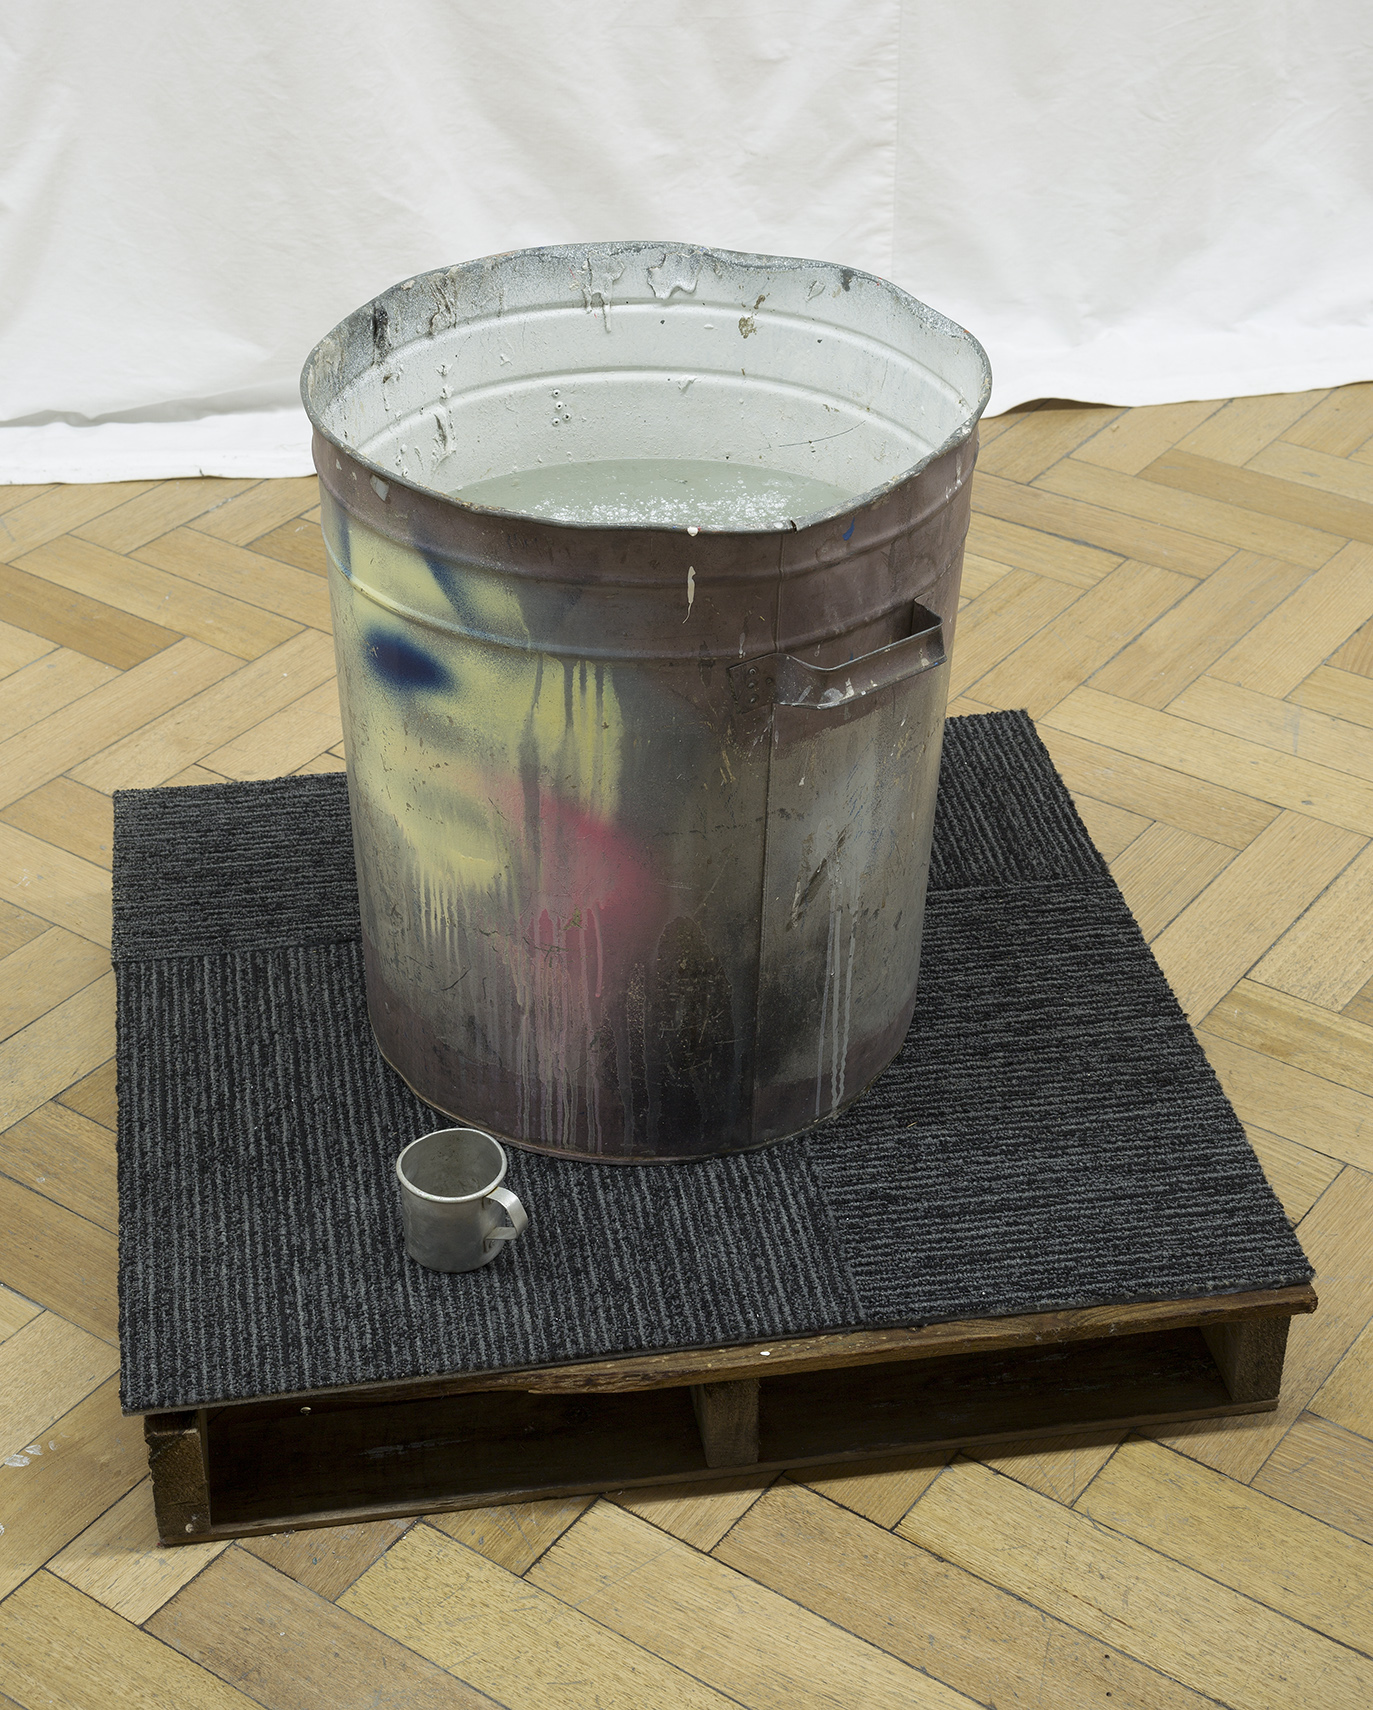   Swish or Swill, 2017. Found tin can, found tin cup, crate, carpet tiling, water and asbestos like talcum powder, 1200 X 900 X 1200 mm. Image: Christian Capurro 